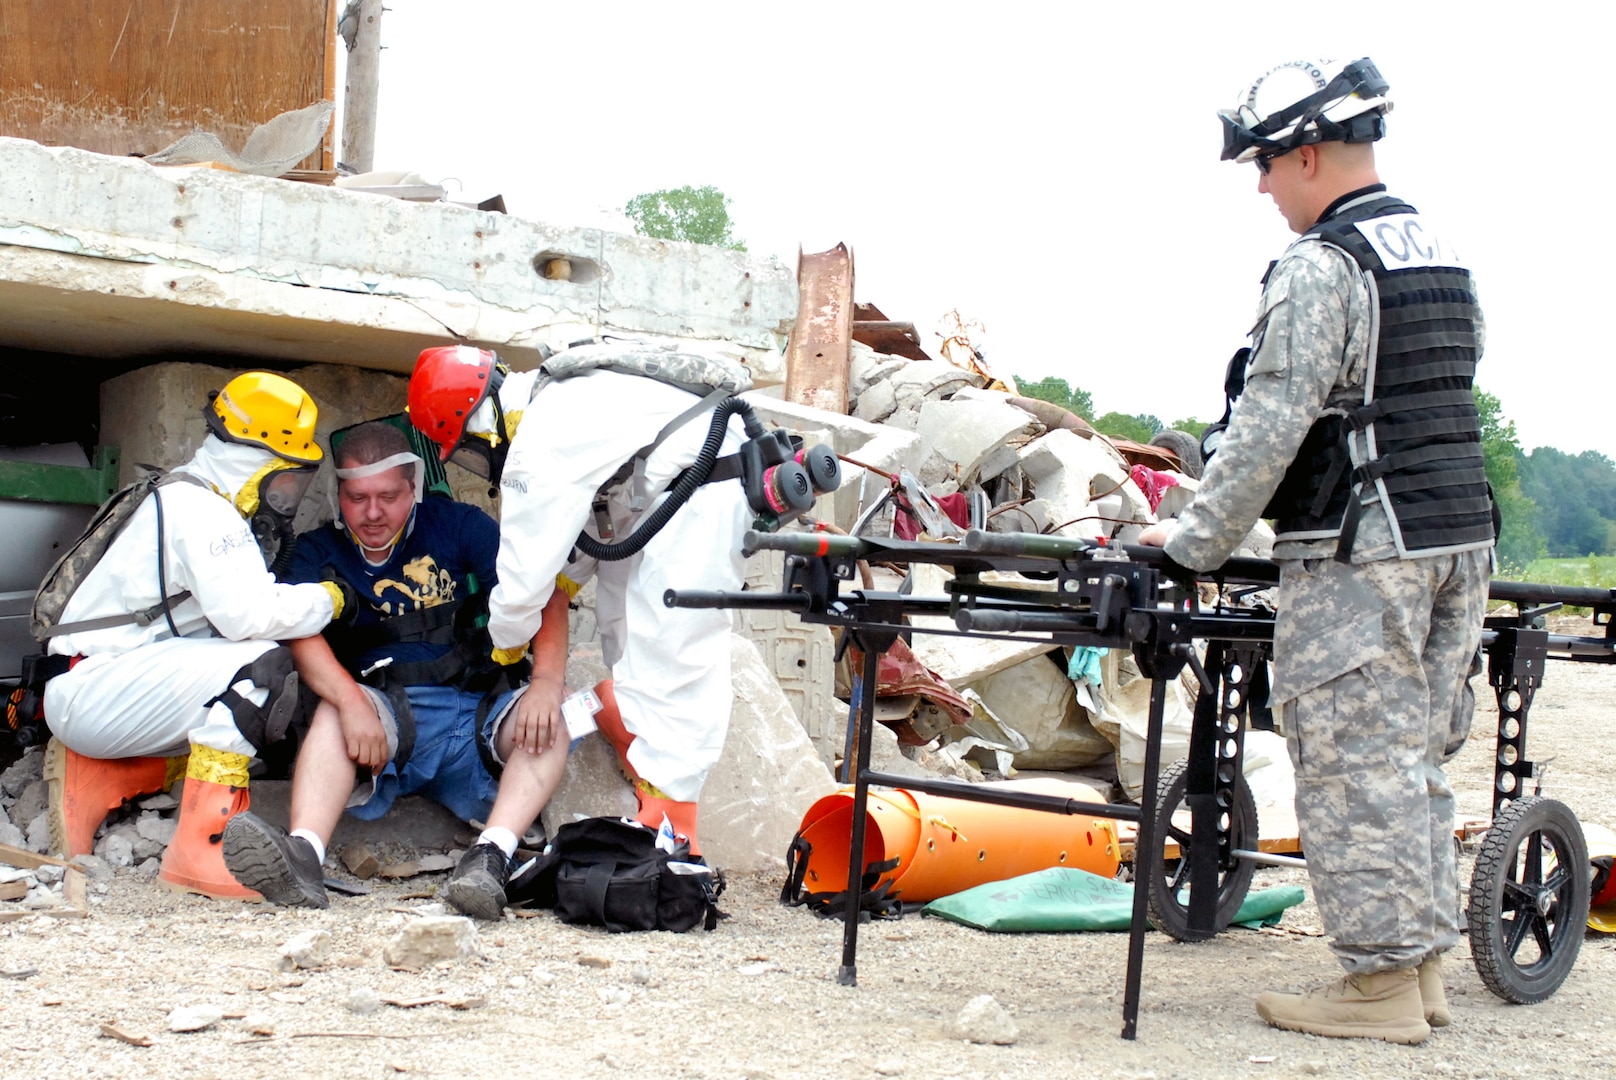 Sgt. Seth Light (right), an observer controller trainer assigned to 821st Engineer Company out of West Virginia, looks on as Sgt. Alex Gaboric, a military policeman from the 811th Engineer Company, an Ohio National Guard unit out of Tarlton, and Tech. Sgt. Ashley Blackburn, an airman and combat medic assigned to the 811th, treat a survivor of a simulated nuclear blast attack during last year’s Vibrant Response 13 field training exercise at the Muscatatuck Urban Training Center, Ind. (Photo by Sgt. Terence Ewings)